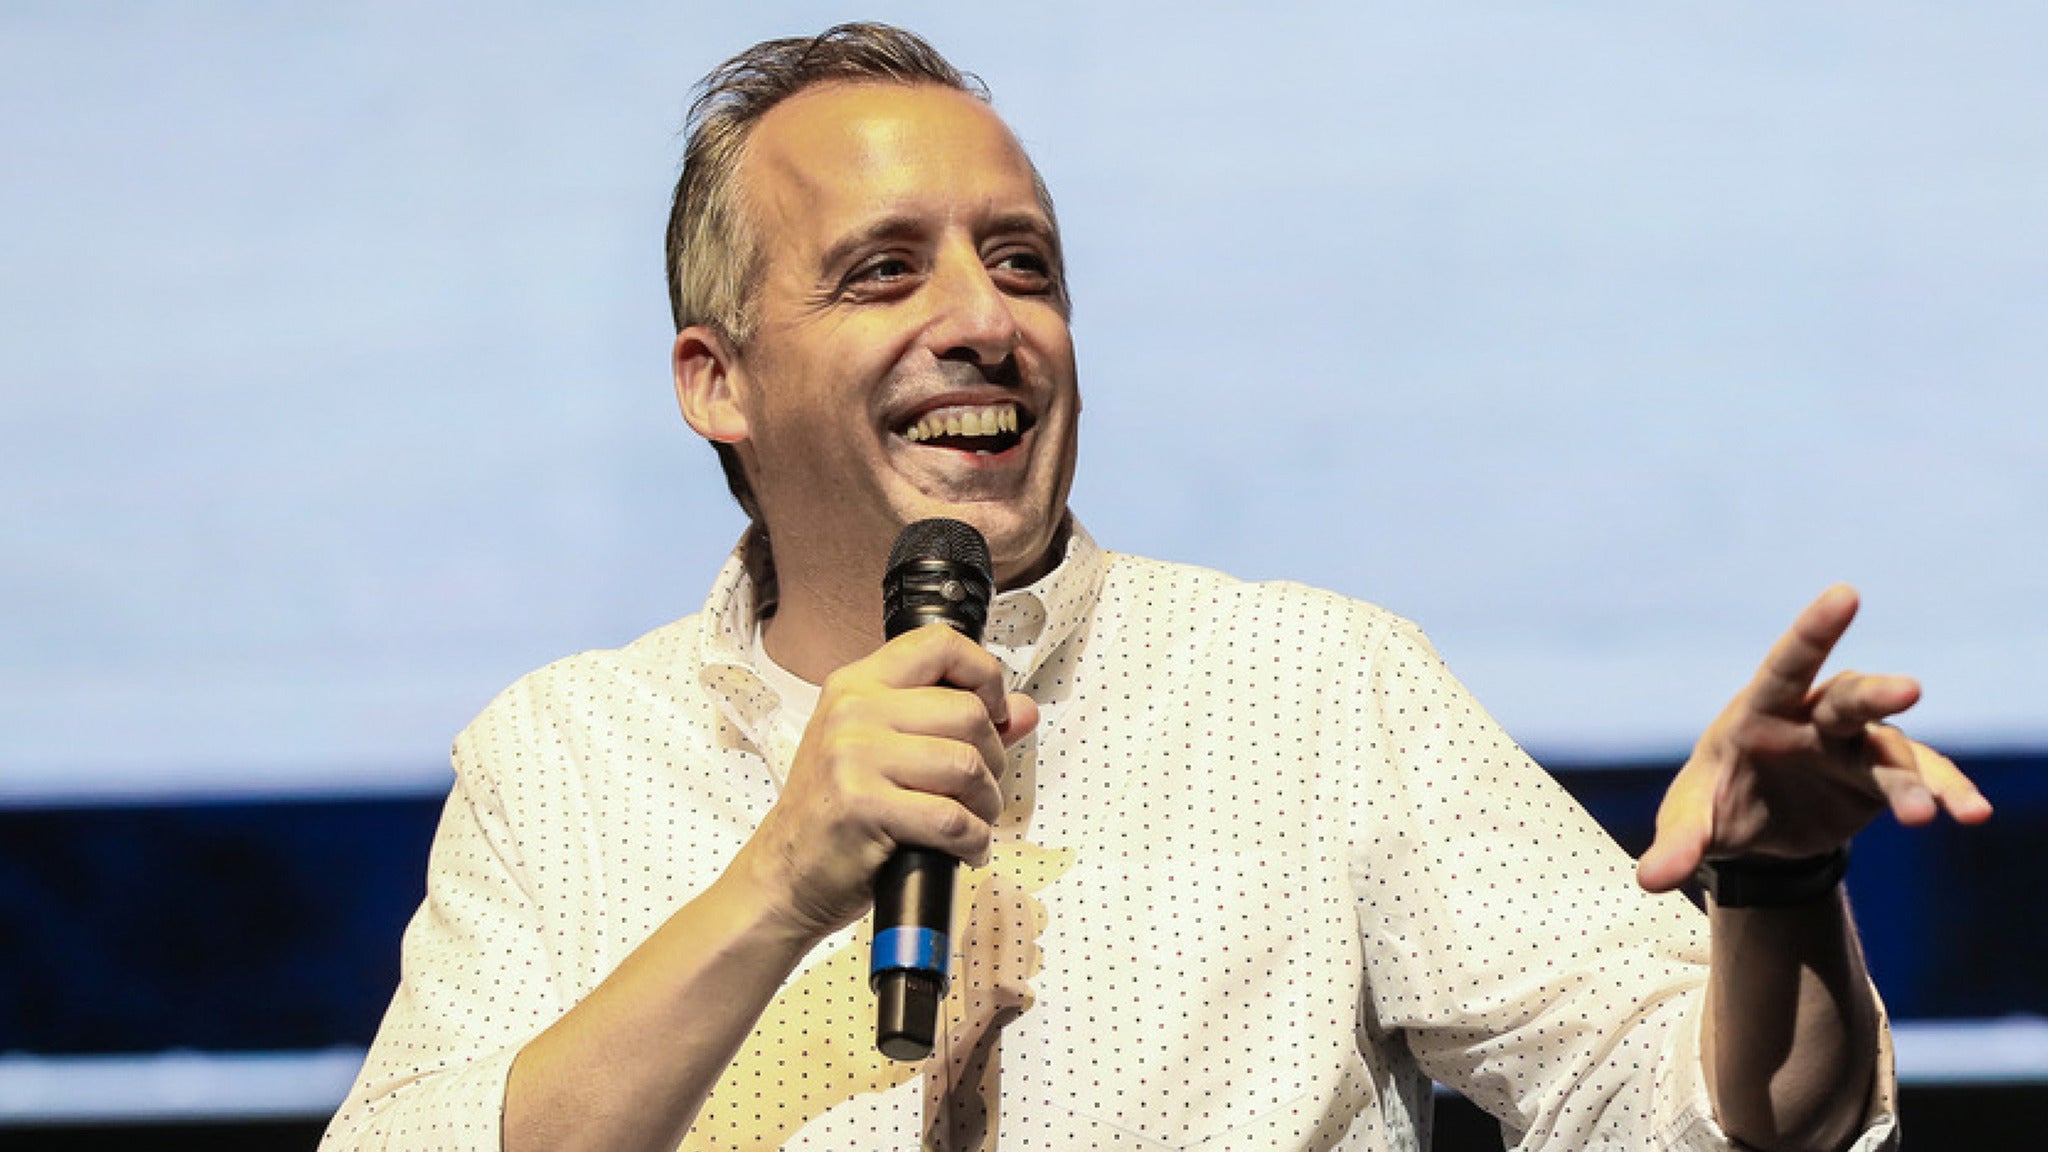 Joe Gatto's Night Of Comedy at HOYT SHERMAN PLACE - Des Moines, IA 50309